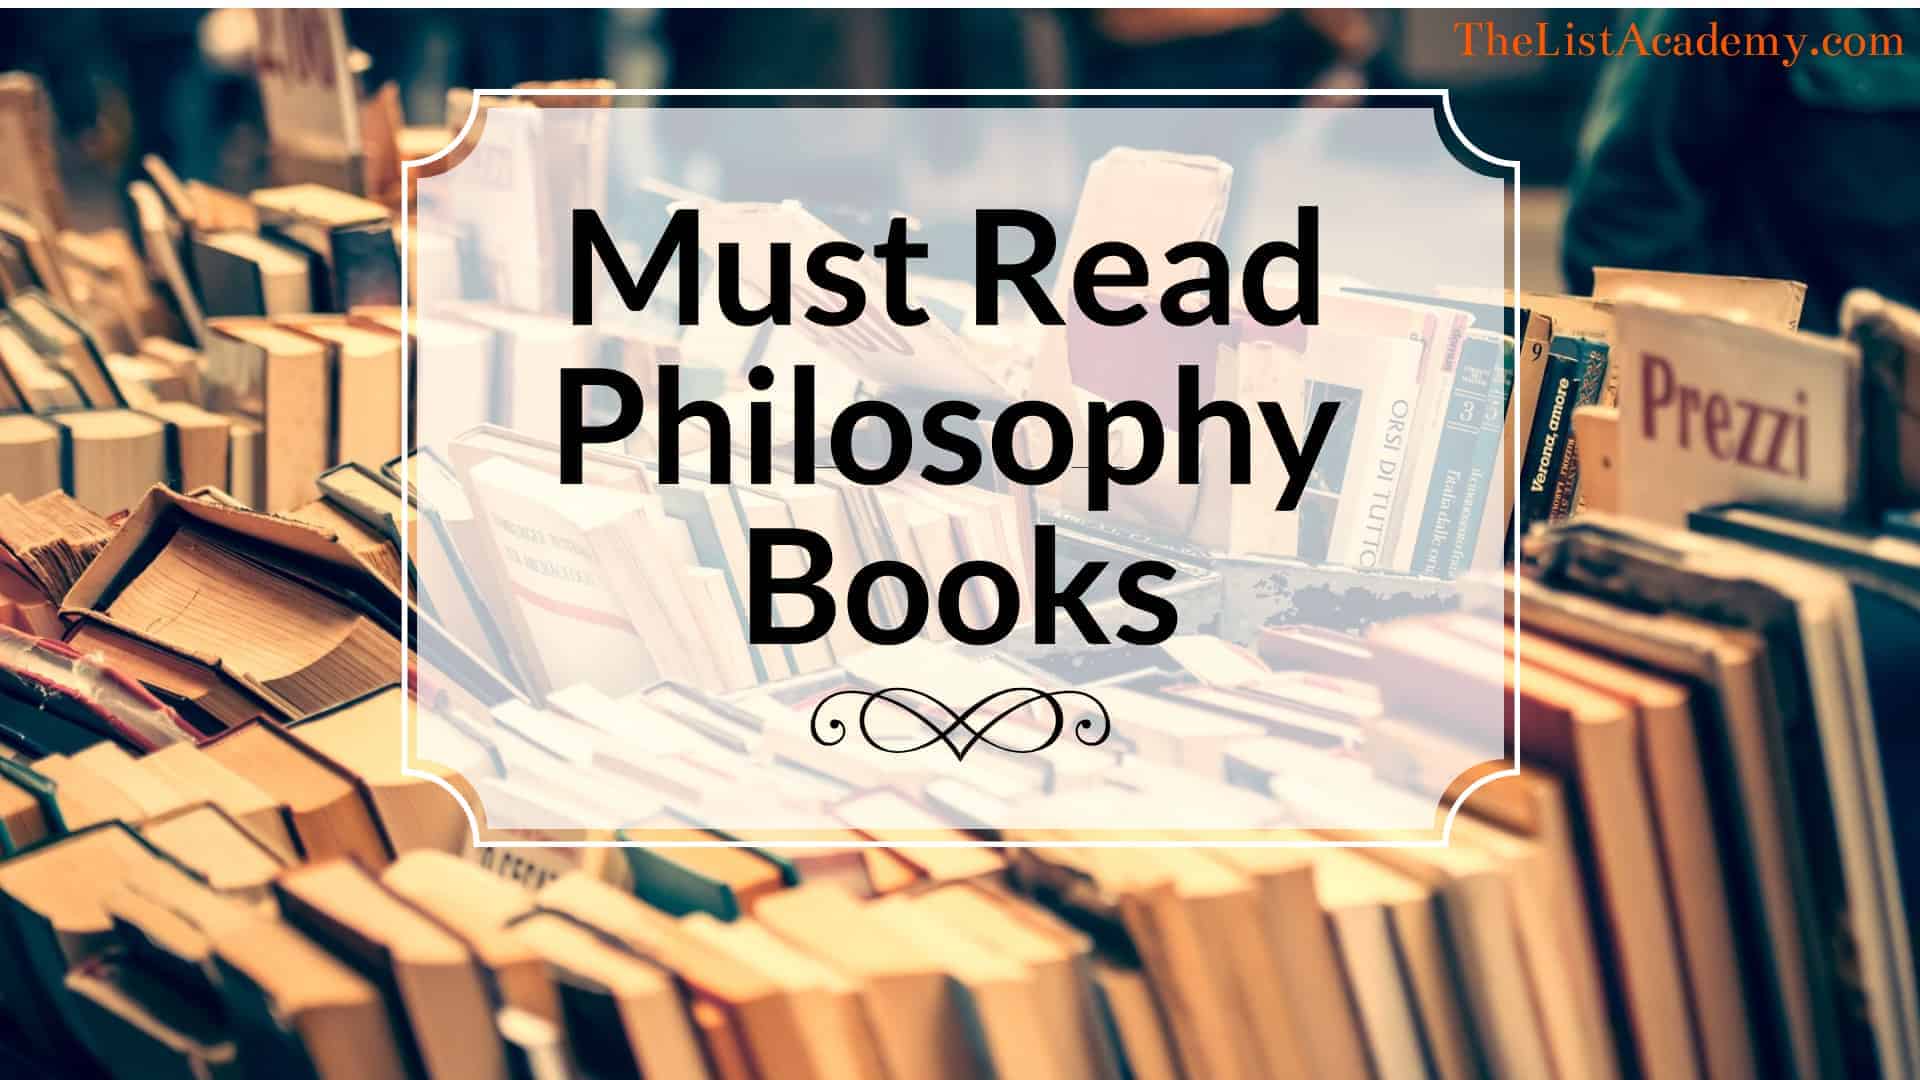 Cover Image For List : 366 Must Read Philosophy Books